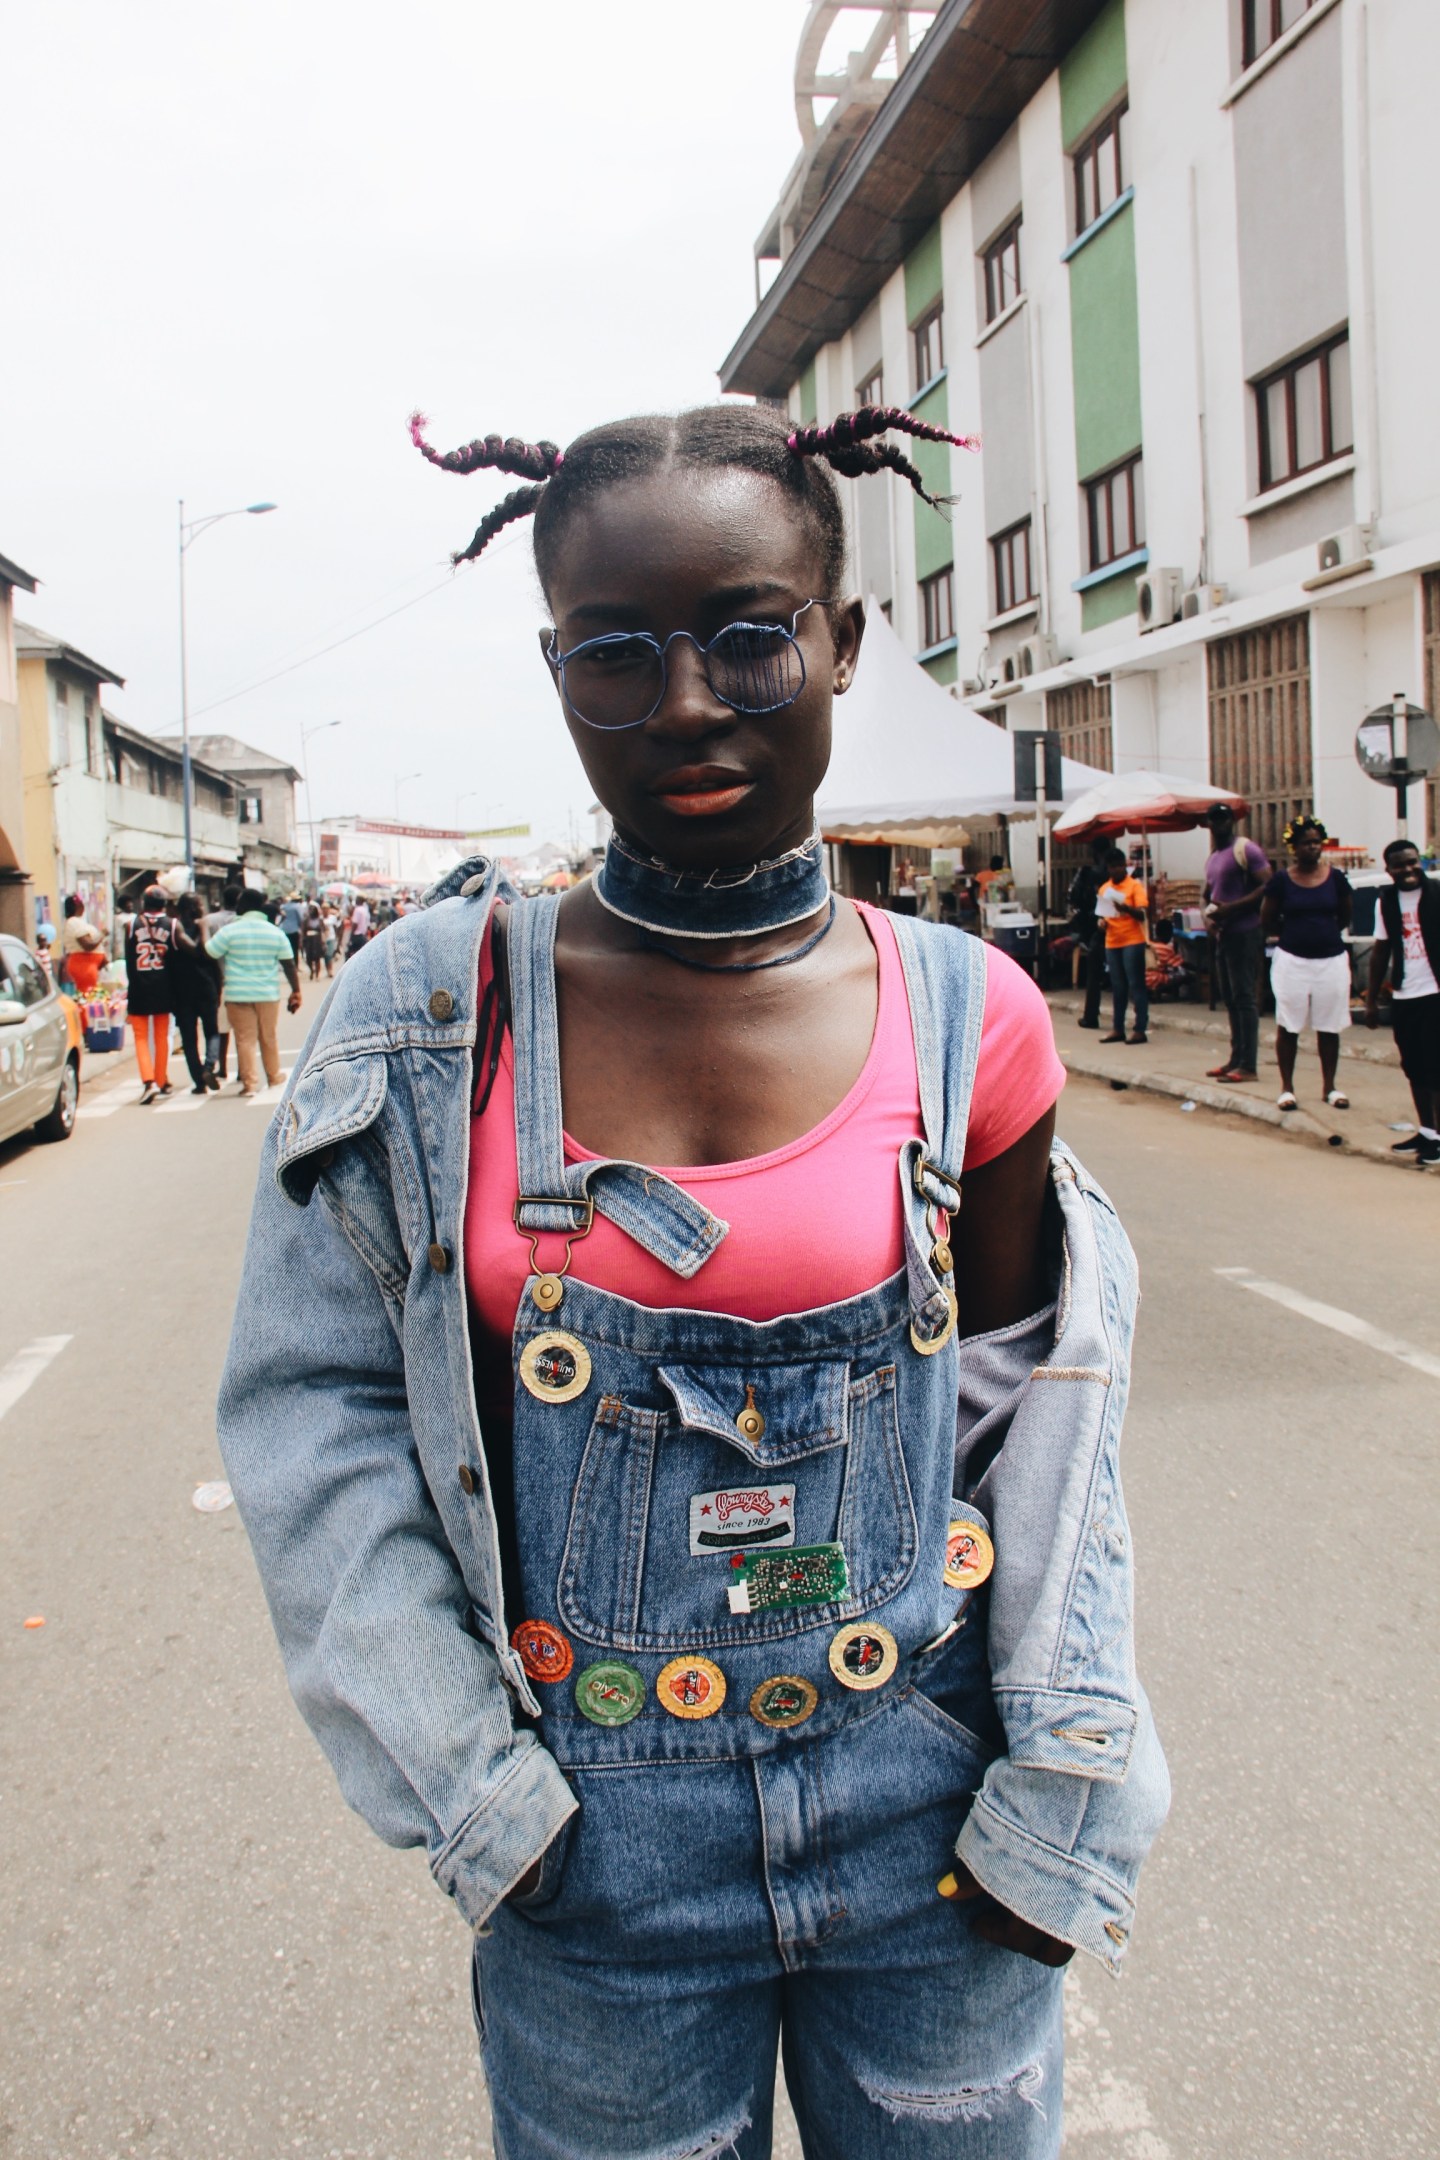 Accra’s Chale Wote festival attendees were peak chill elegance